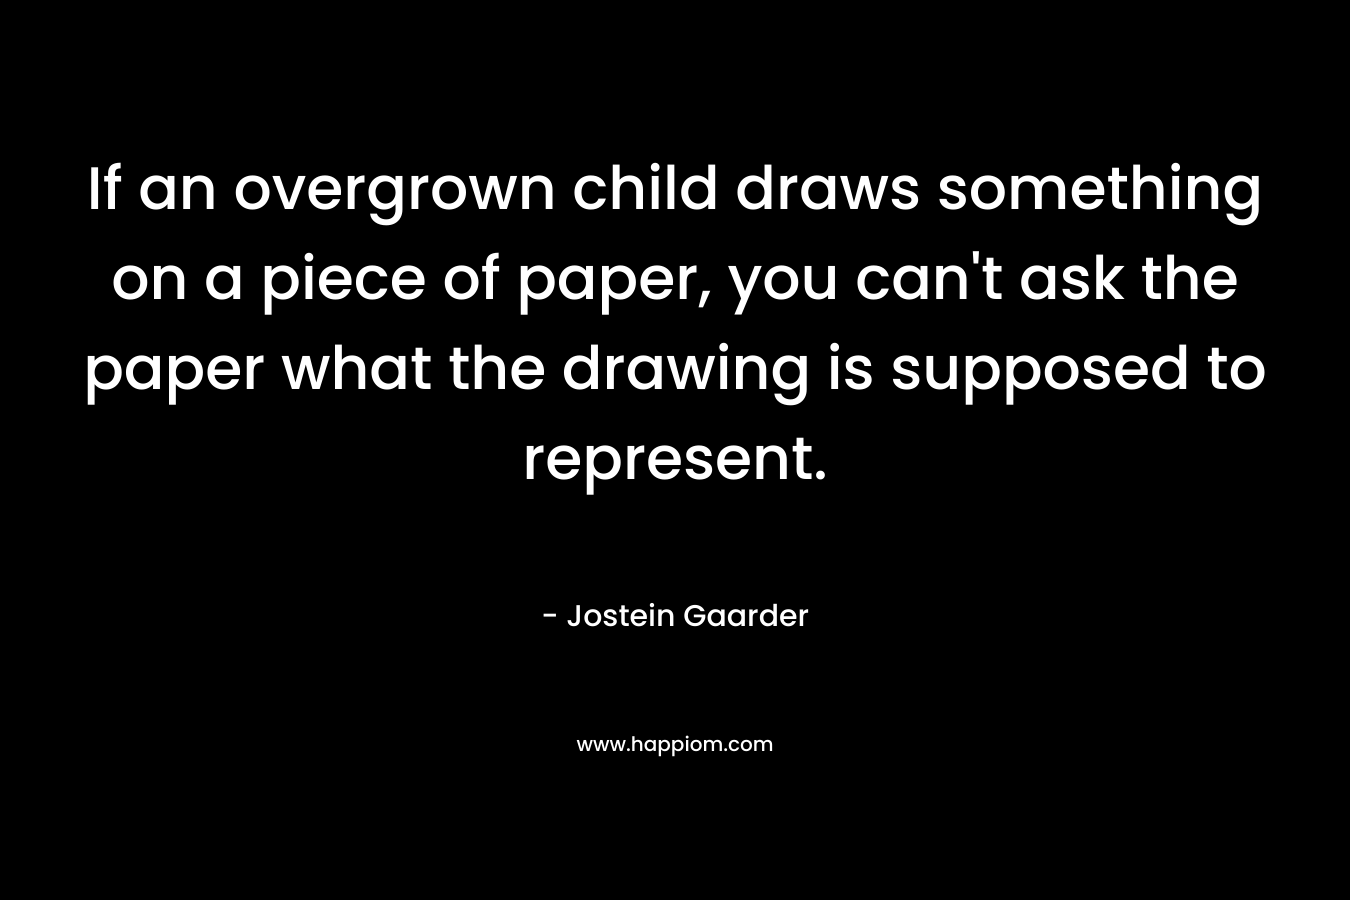 If an overgrown child draws something on a piece of paper, you can't ask the paper what the drawing is supposed to represent.